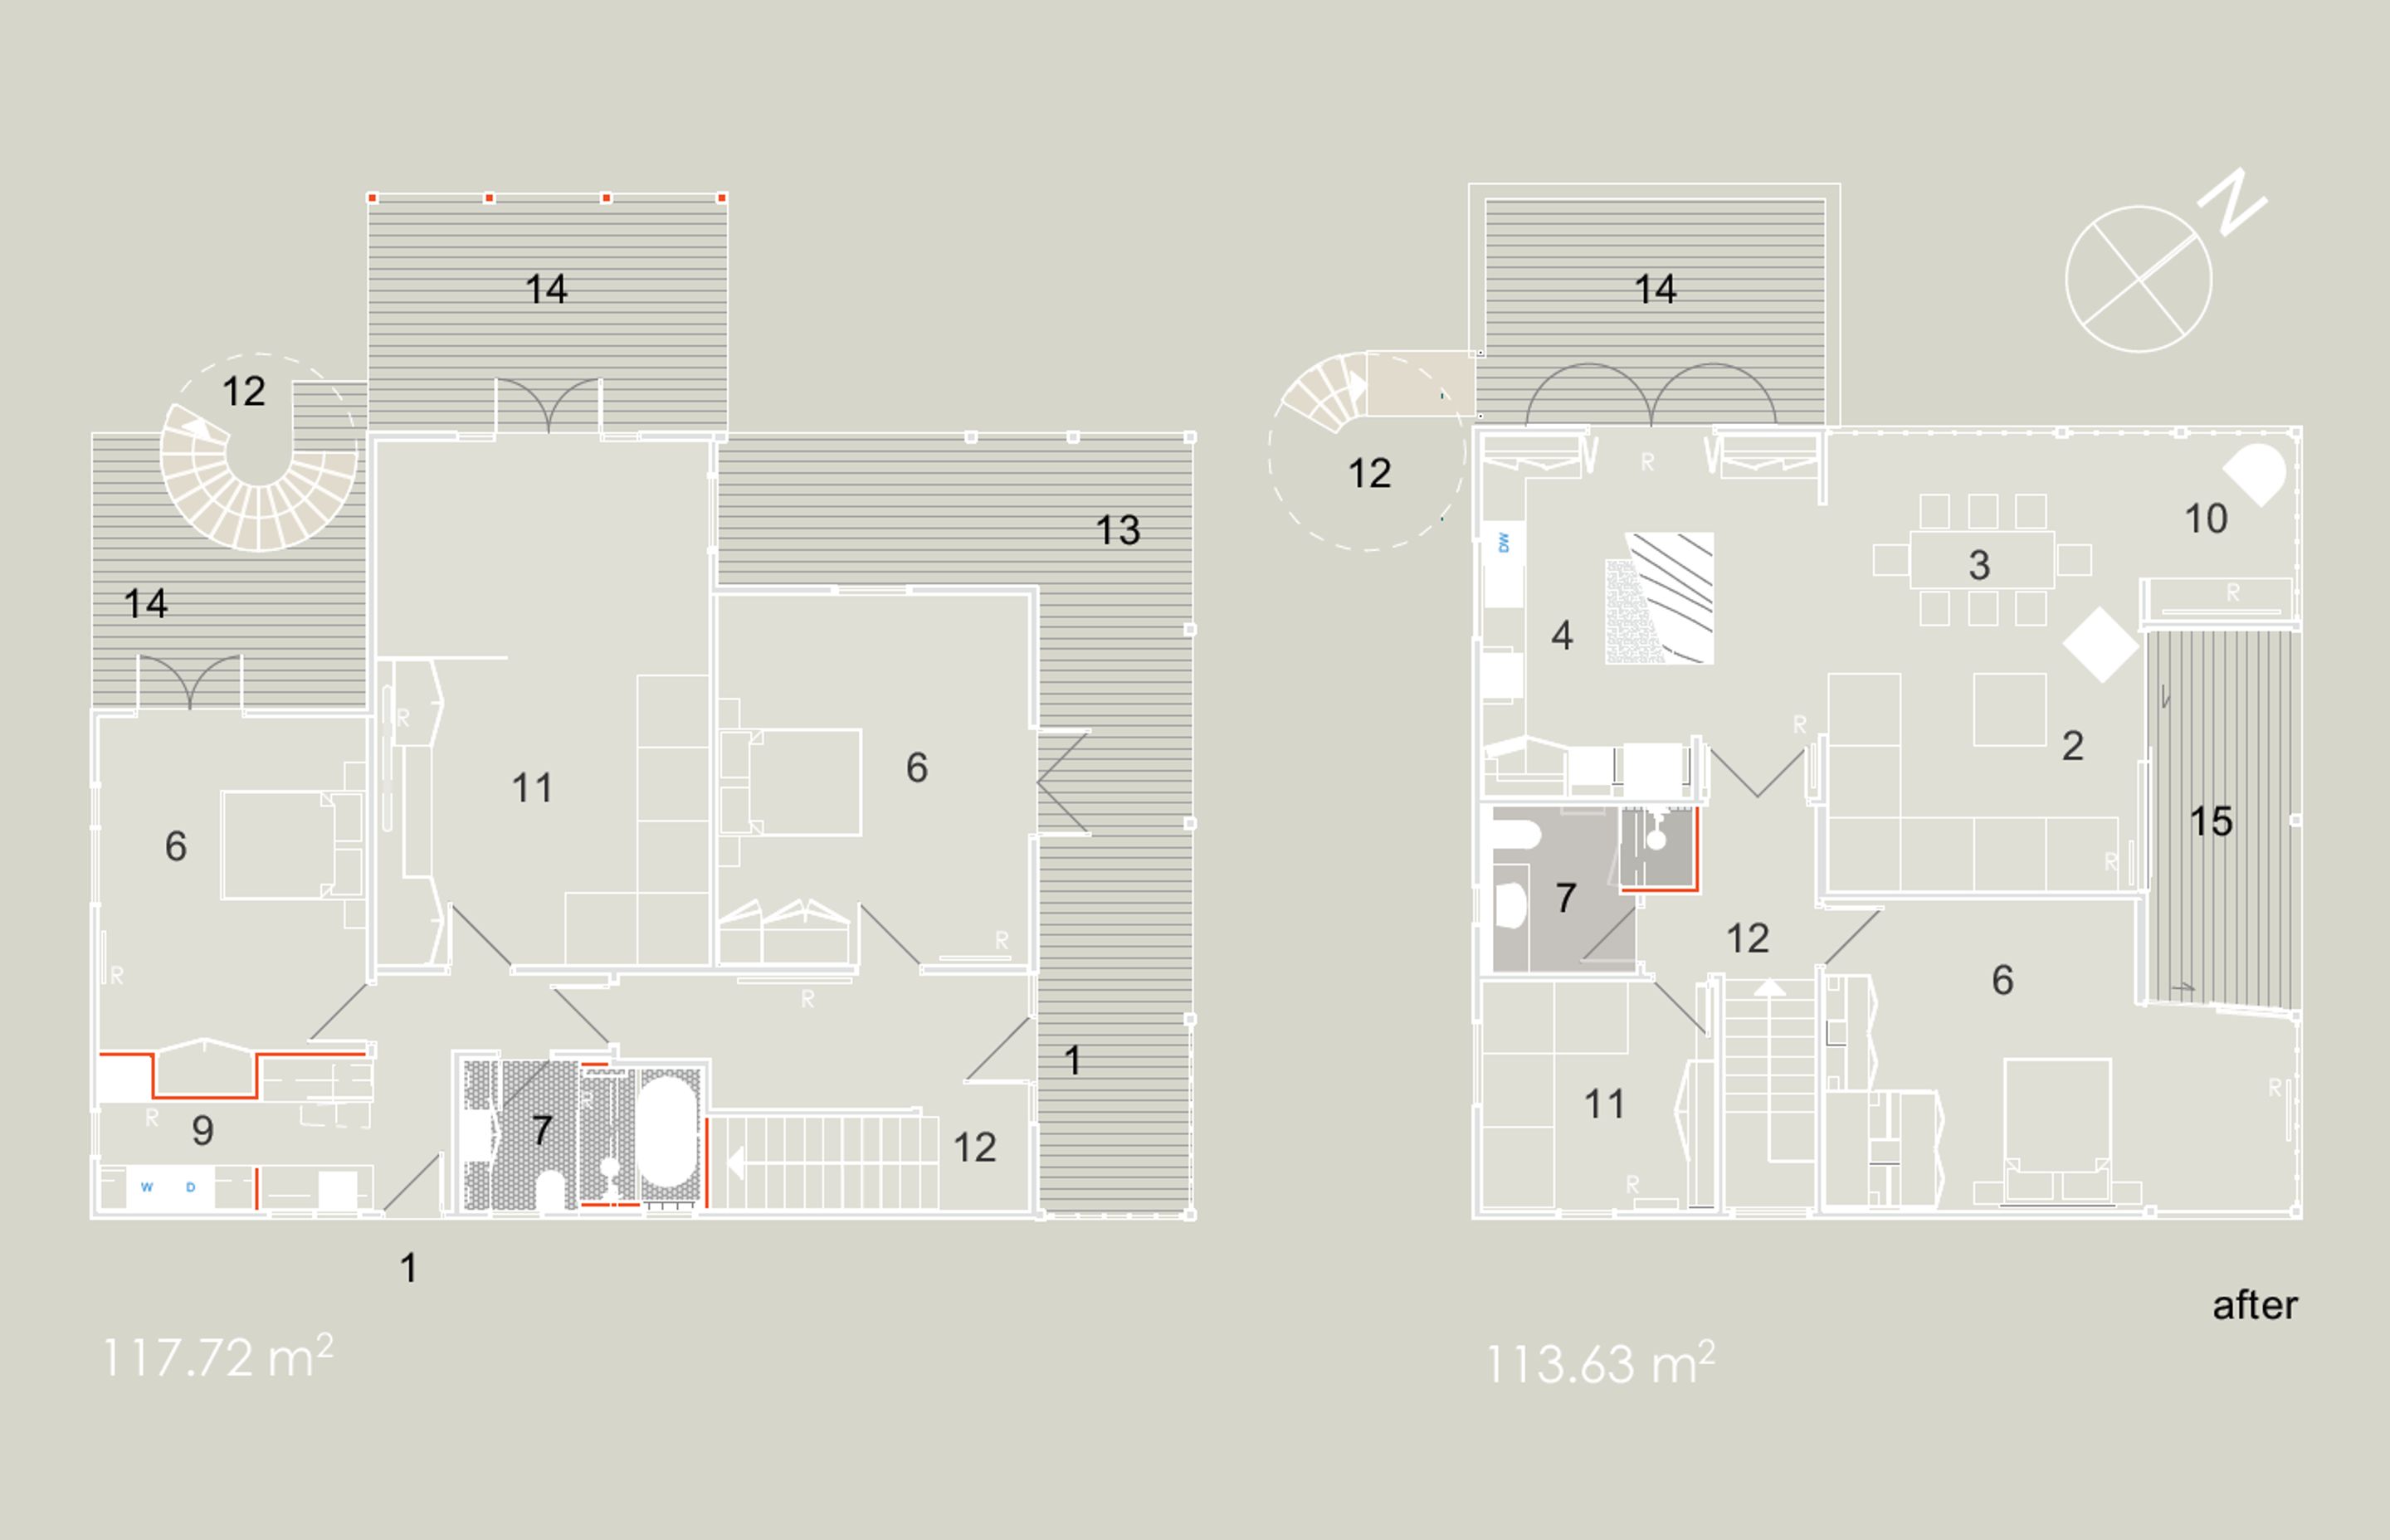 The 'after' ground and first-floor plans show the changes made to Esplanade House by Linetype Architectural.